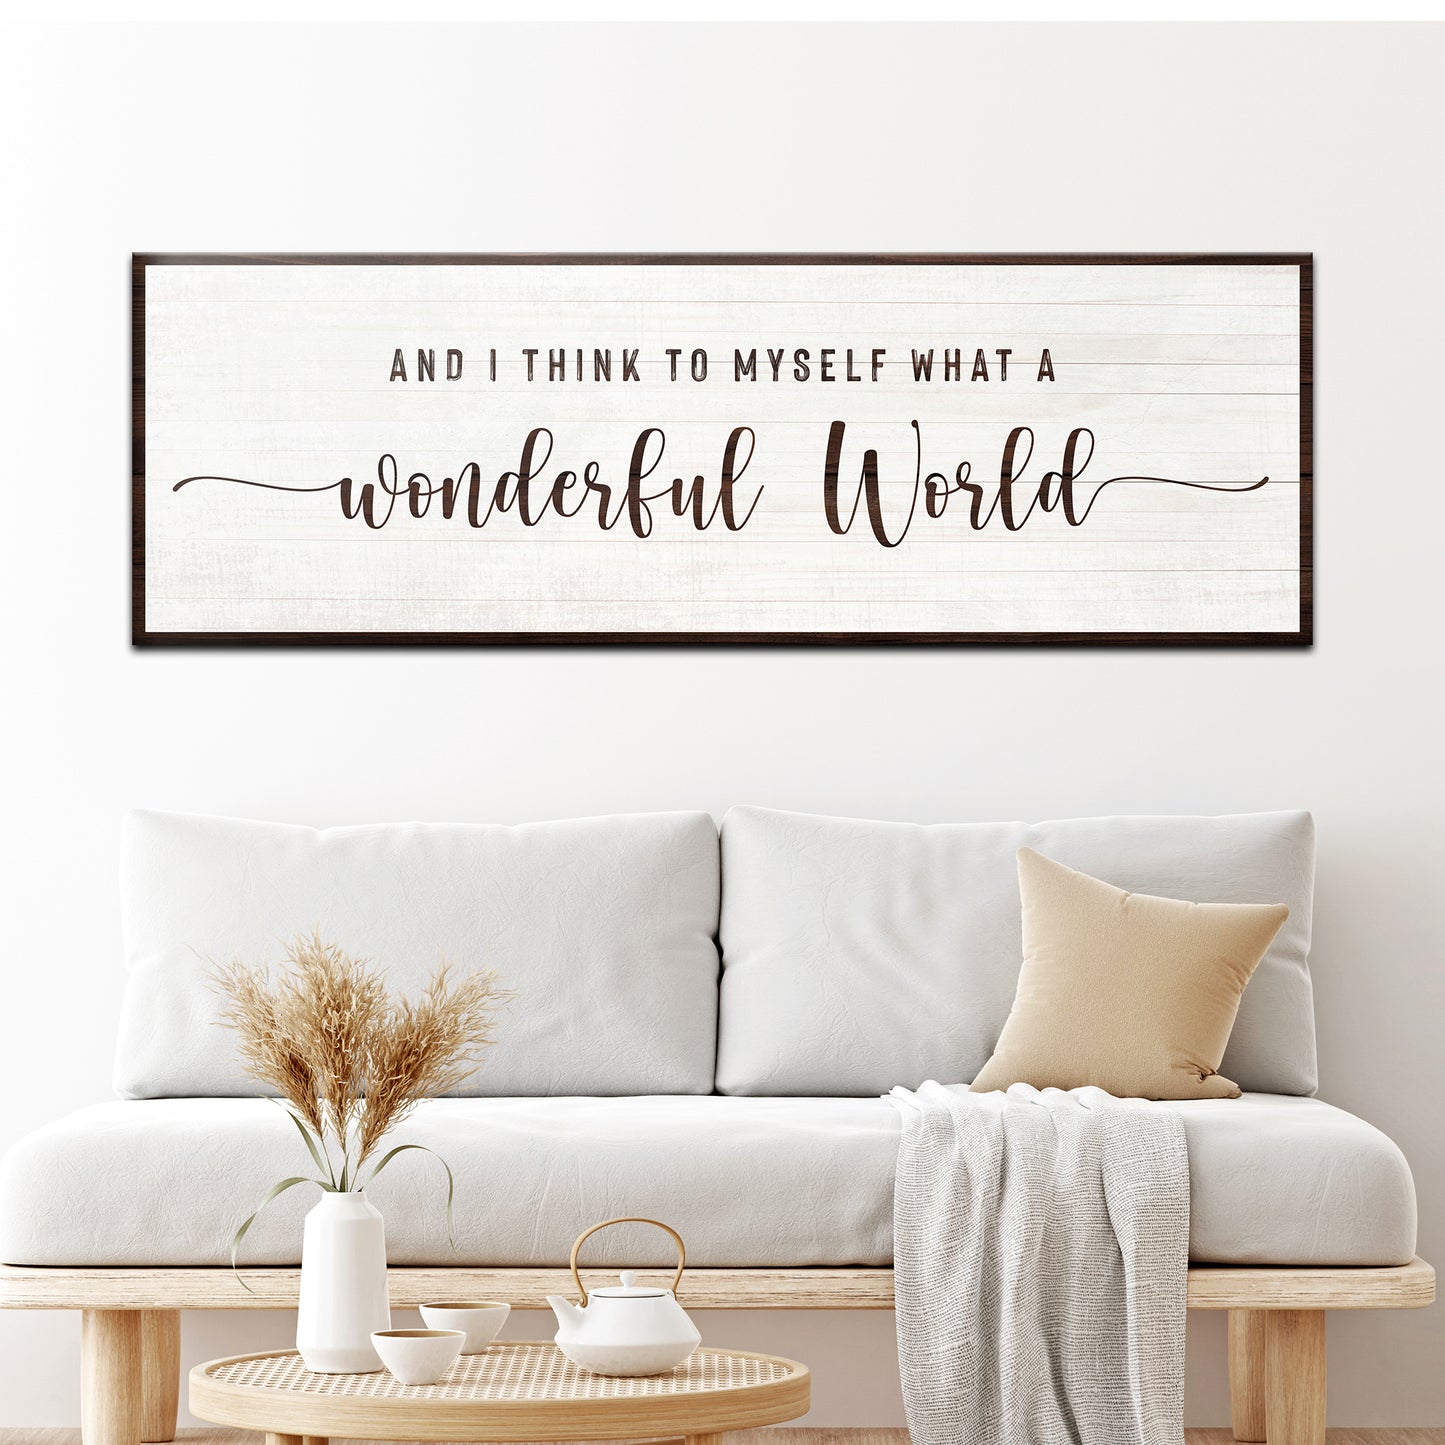 What A Wonderful World Sign Style 3 - Image by Tailored Canvases